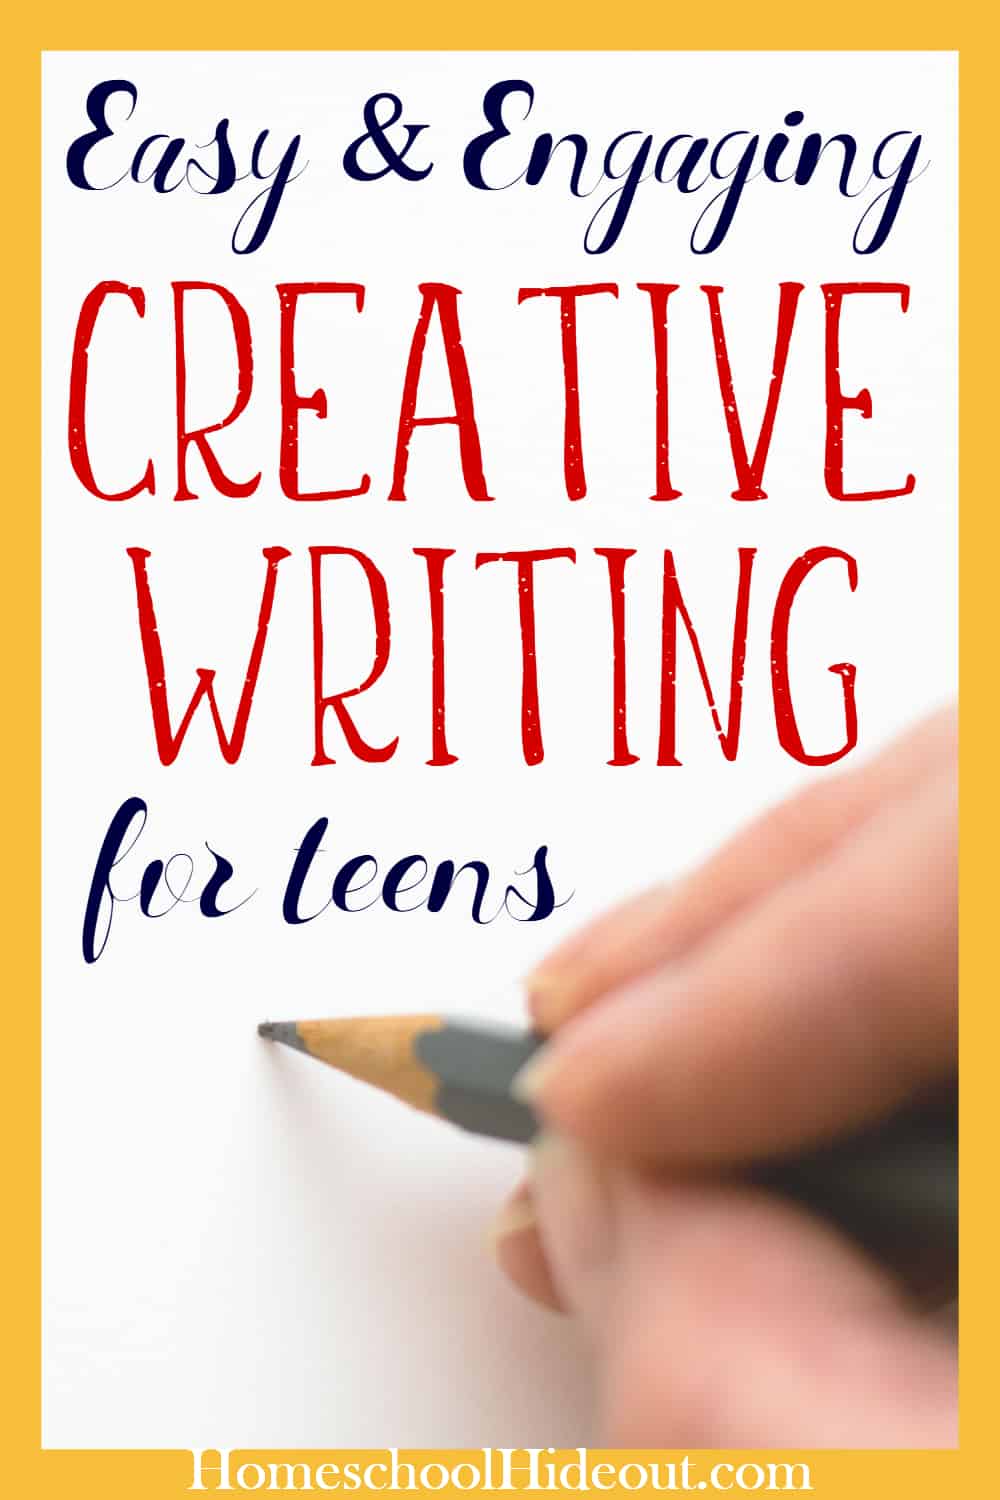 Our creative writing curriculum is engaging and easy-easy for mama! Take the resistance out of writing and make it fun for EVERYONE!